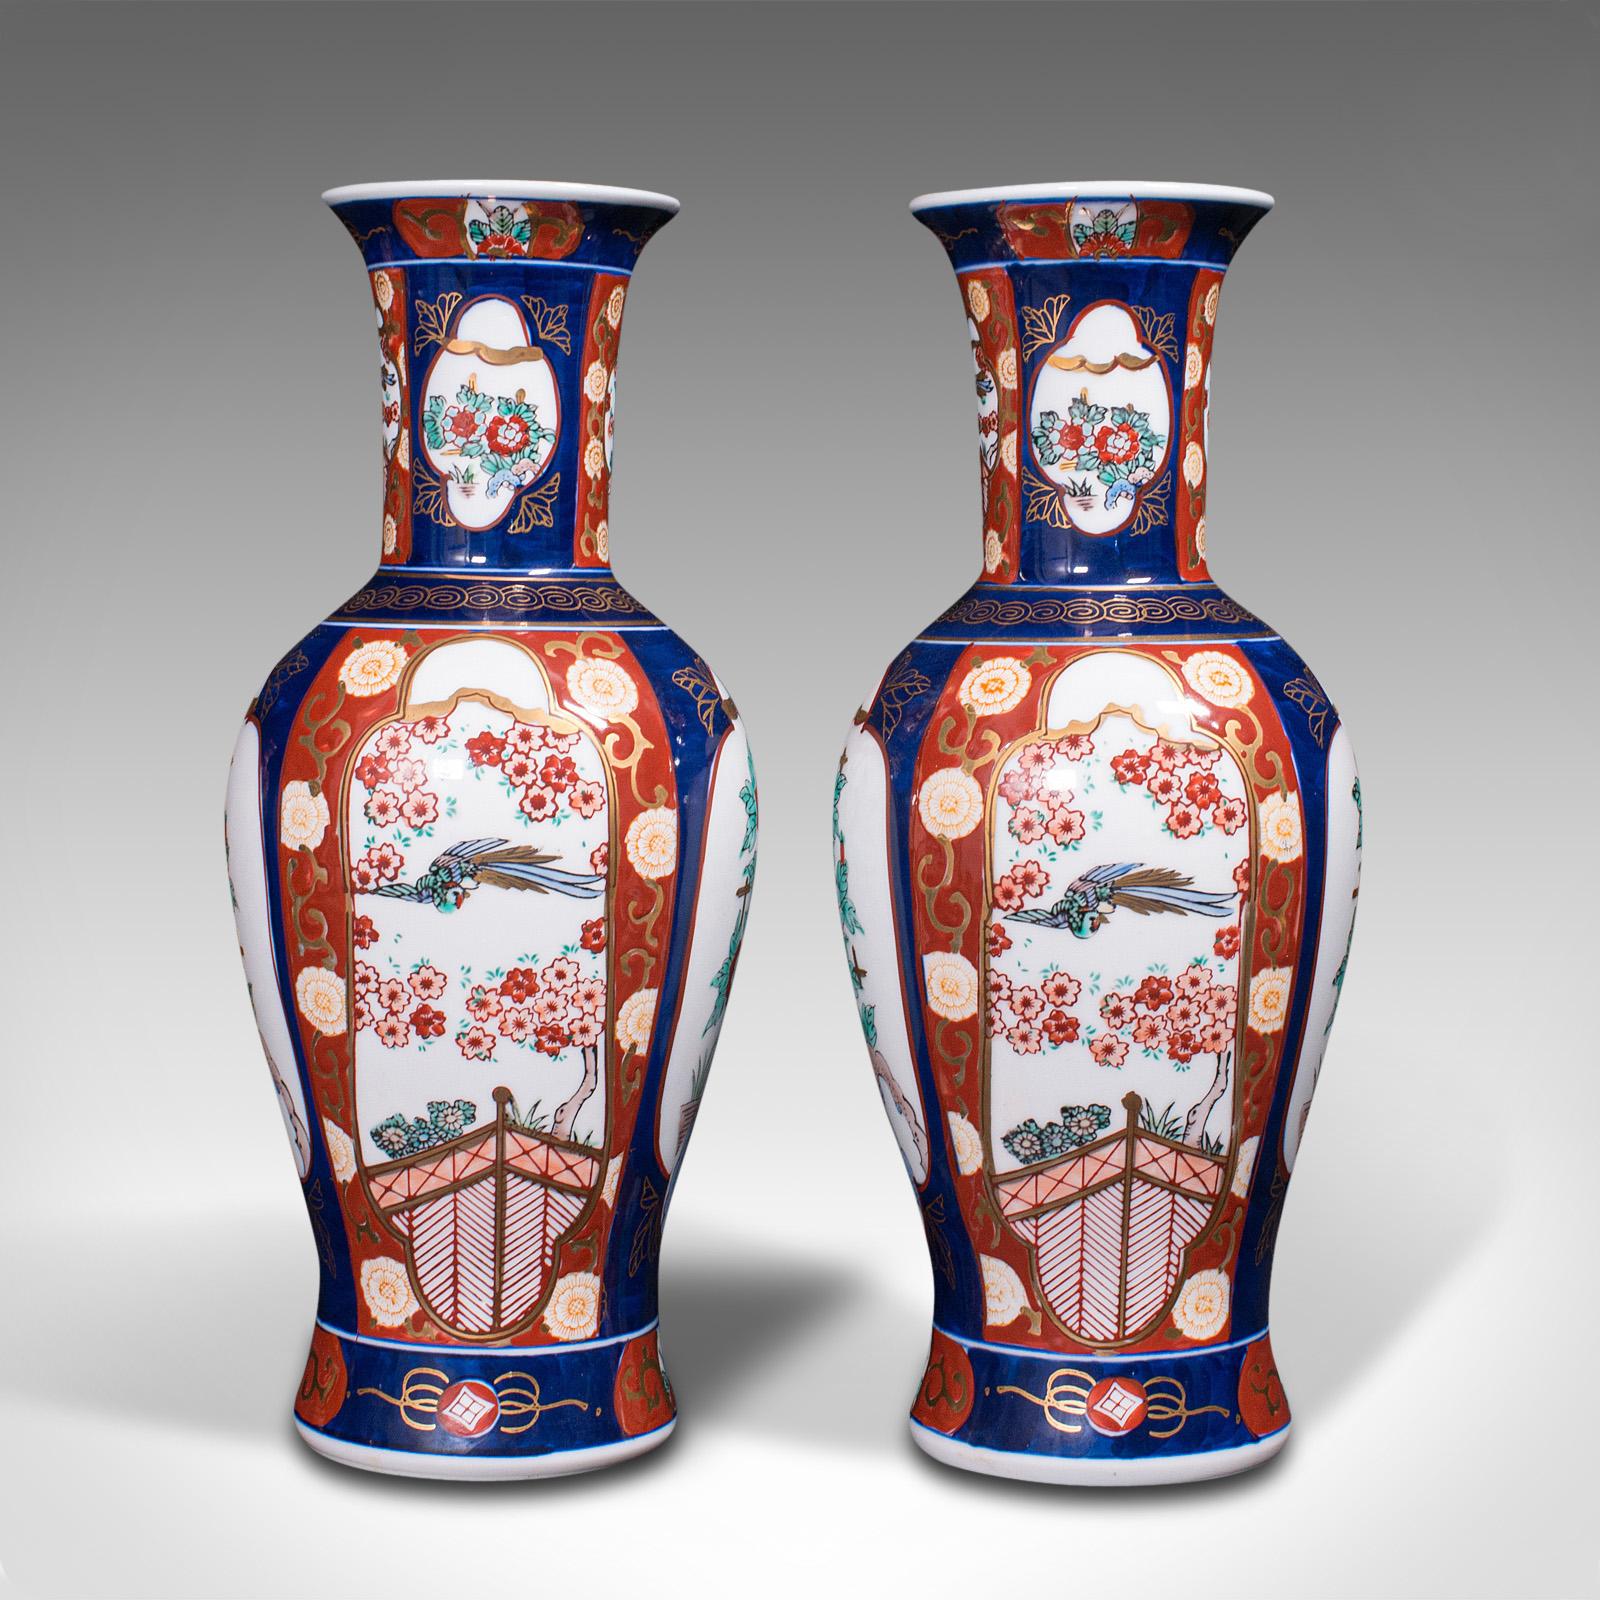 This is a pair of vintage flower vases. A Chinese, ceramic display urn in Imari revival taste, dating to the late 20th century, circa 1980.

Attractive red and blue palette a hallmark of Imari
Displaying a desirable aged patina and free of